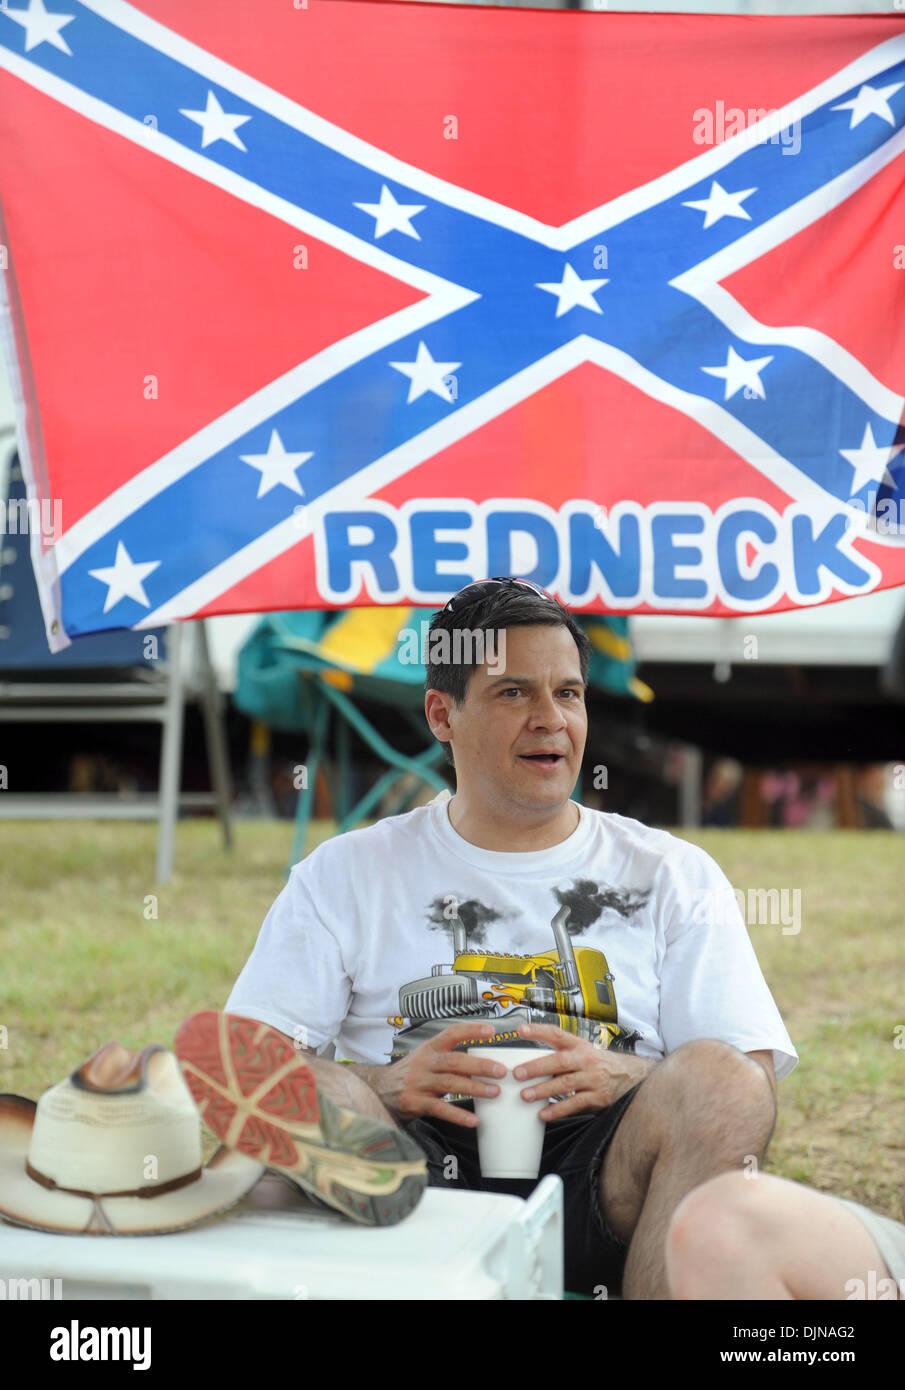 Mar 11, 2008 - East Dublin, Georgia, USA - Paul Pasier watches the activities during the 13th annual Summer Redneck Games at Buckeye Park in East Dublin, Georgia, on Saturday. The annual homage to Southerners, began as a spoof to the 1996 Summer Olympics in Atlanta. Thousands of revelers attend the event whose events include bobbing for pigs feet, the mud pit belly flop and armpit  Stock Photo